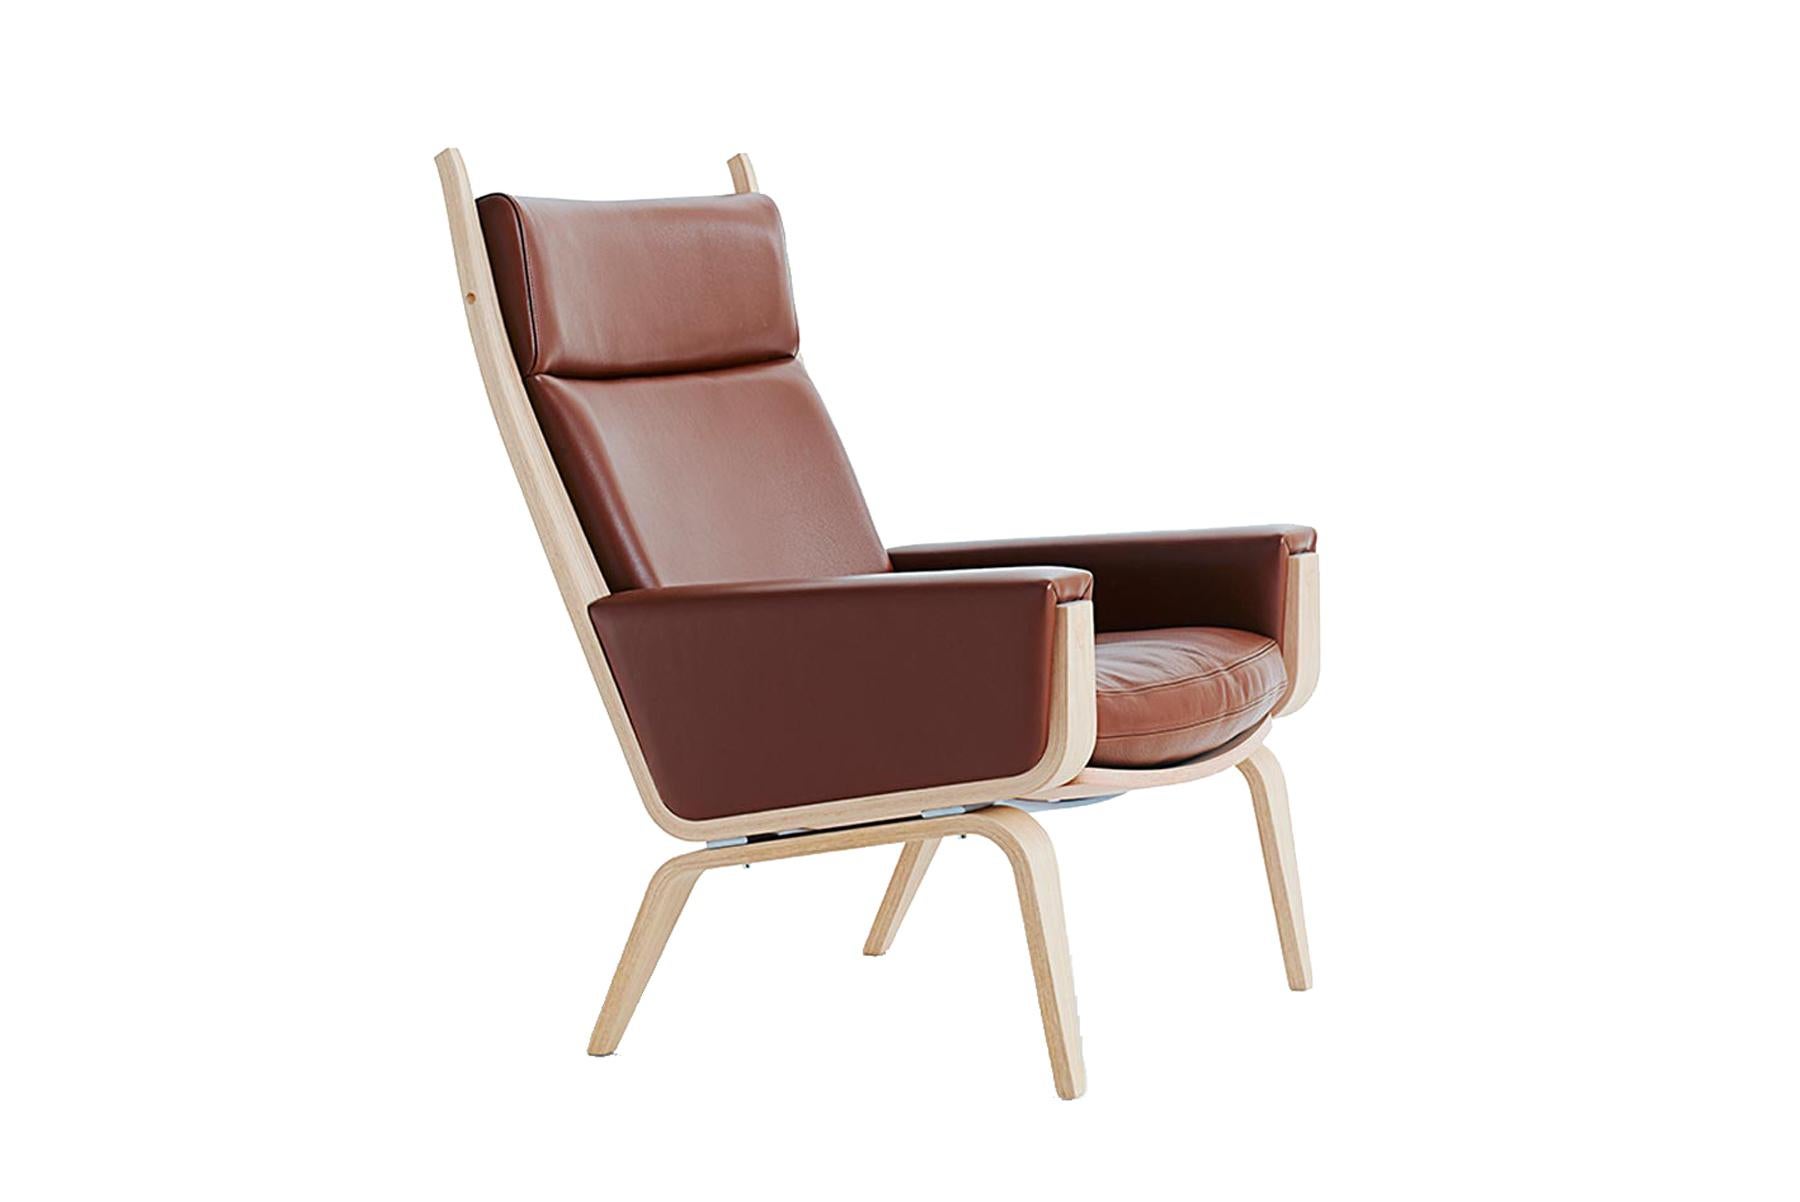 Designed in 1967 by Hans Wegner, the 501A highback lounge chair blends timeless elegance and comfort. Crafted in laminated, bent oak and hand built at Getama’s factory in Gedsted, Denmark by skilled cabinetmakers using traditional Scandinavian